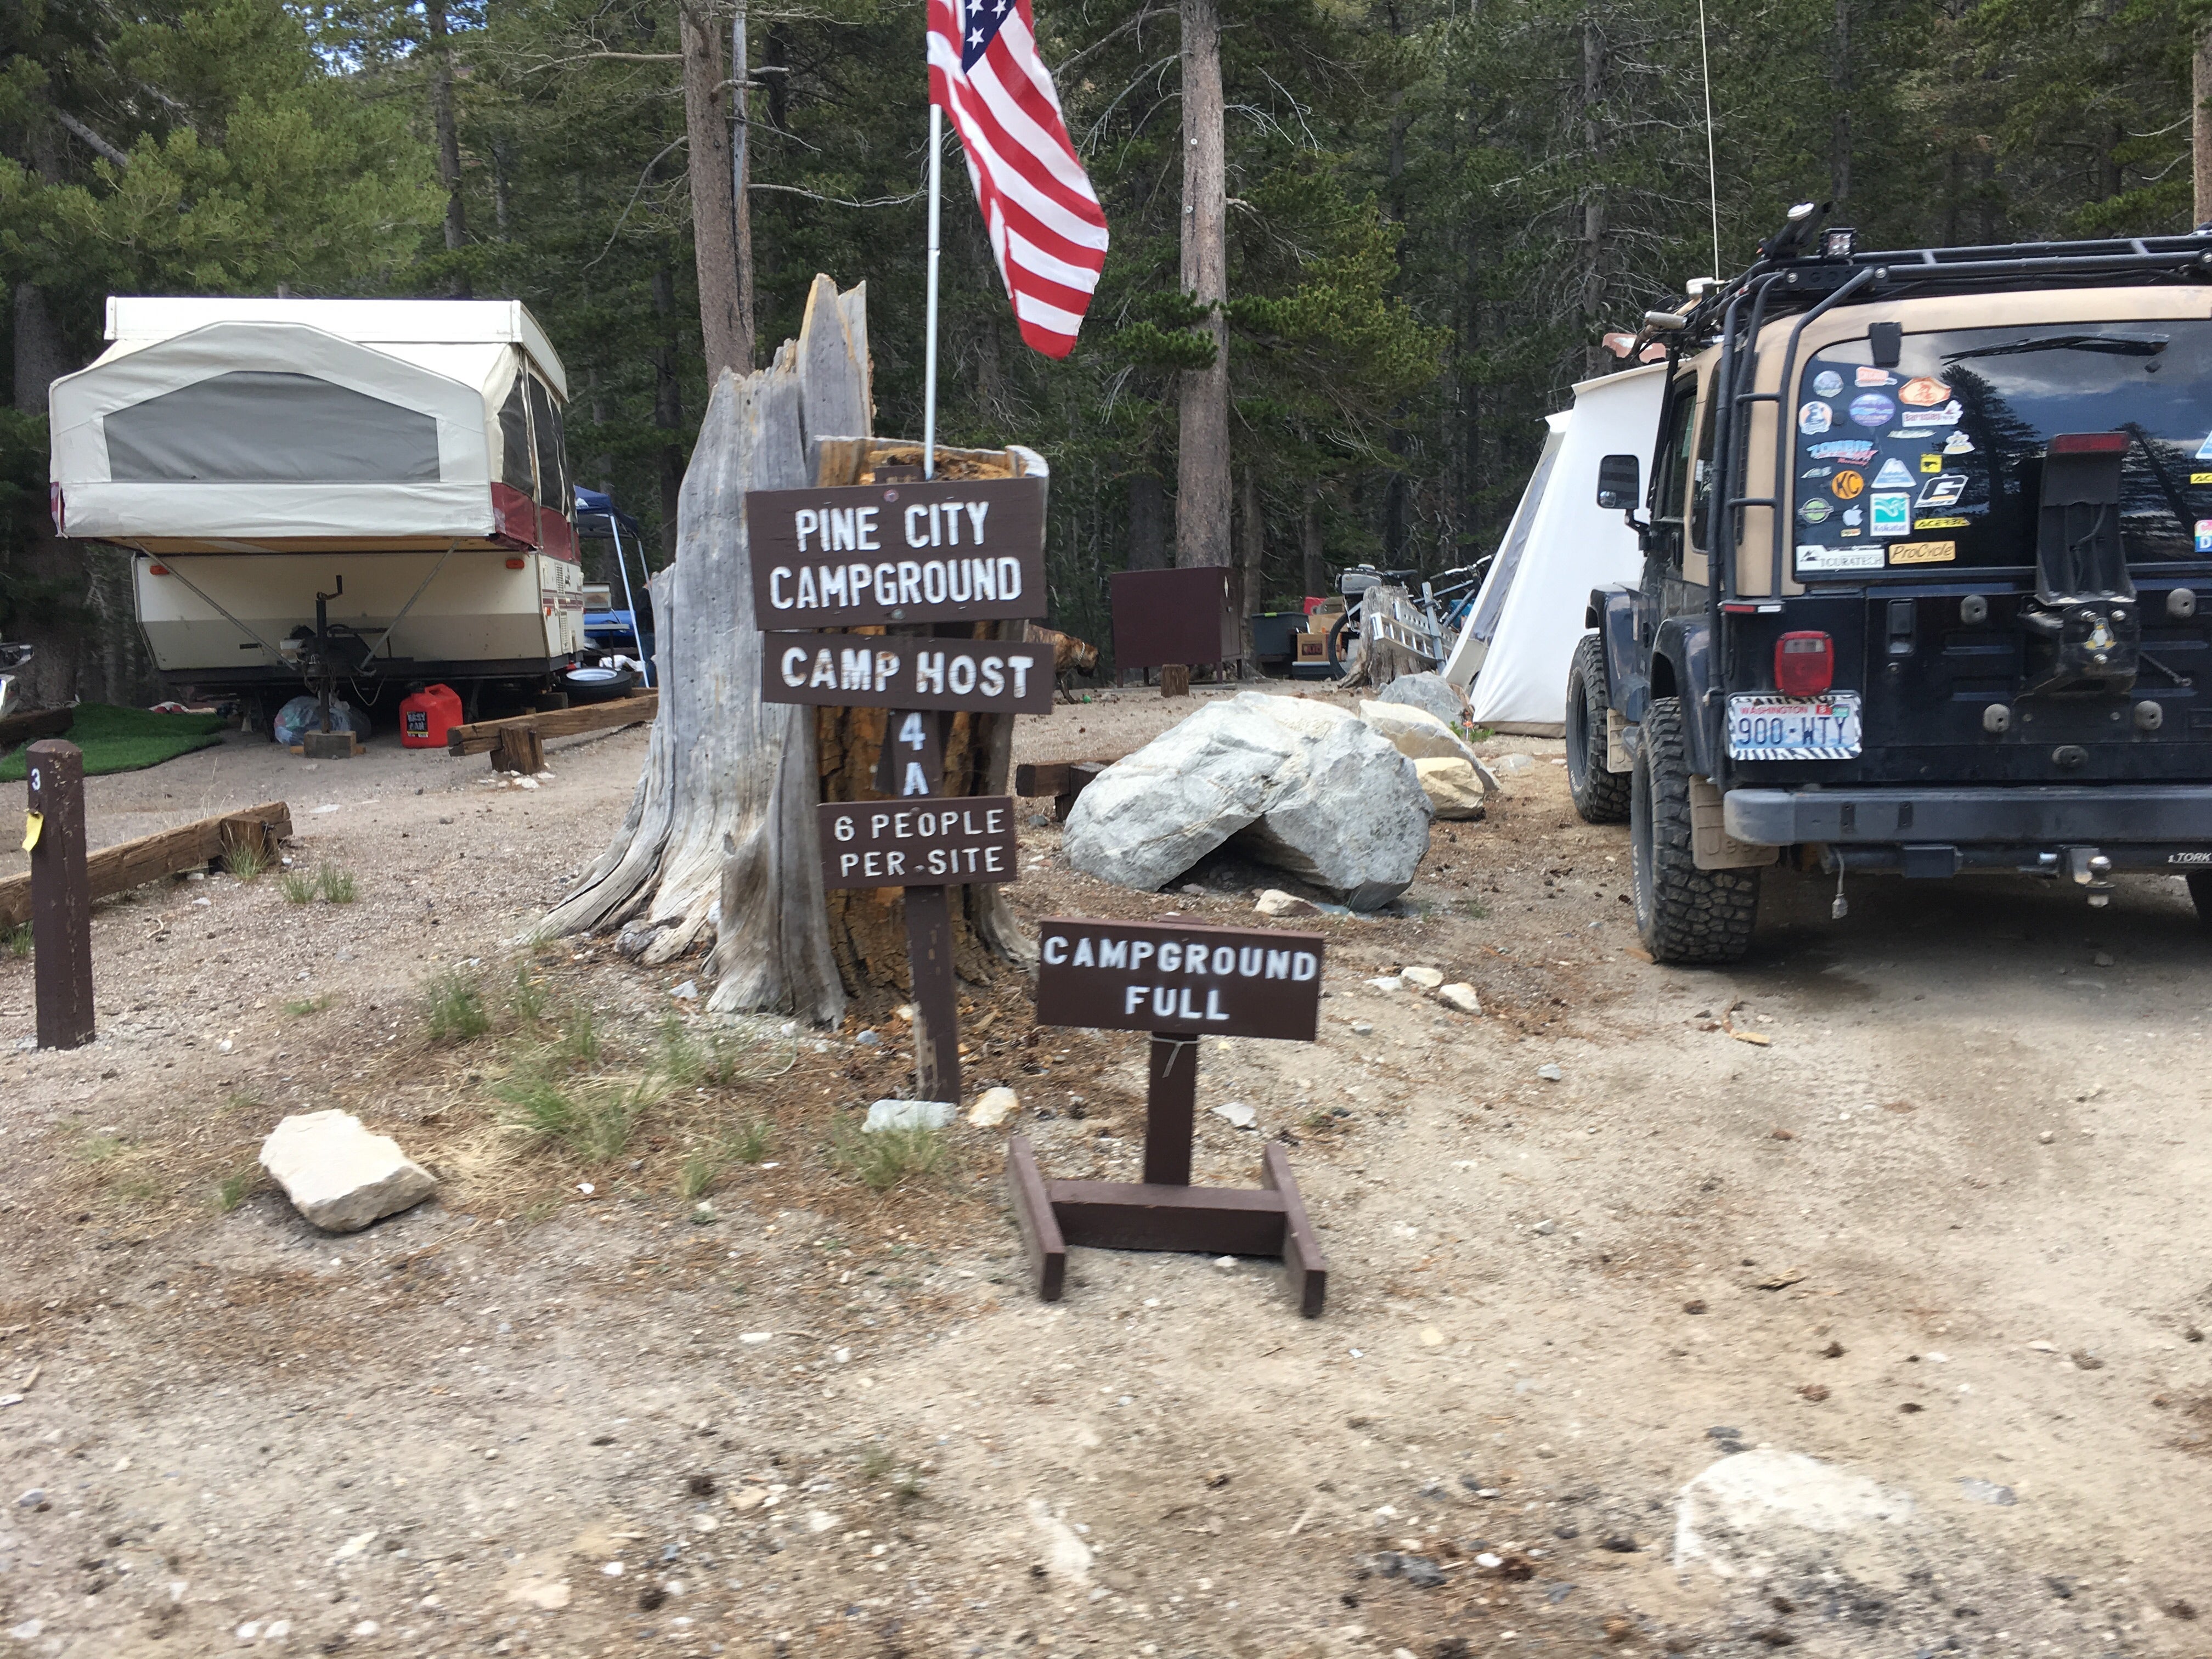 Camper submitted image from Pine City Campground - 5